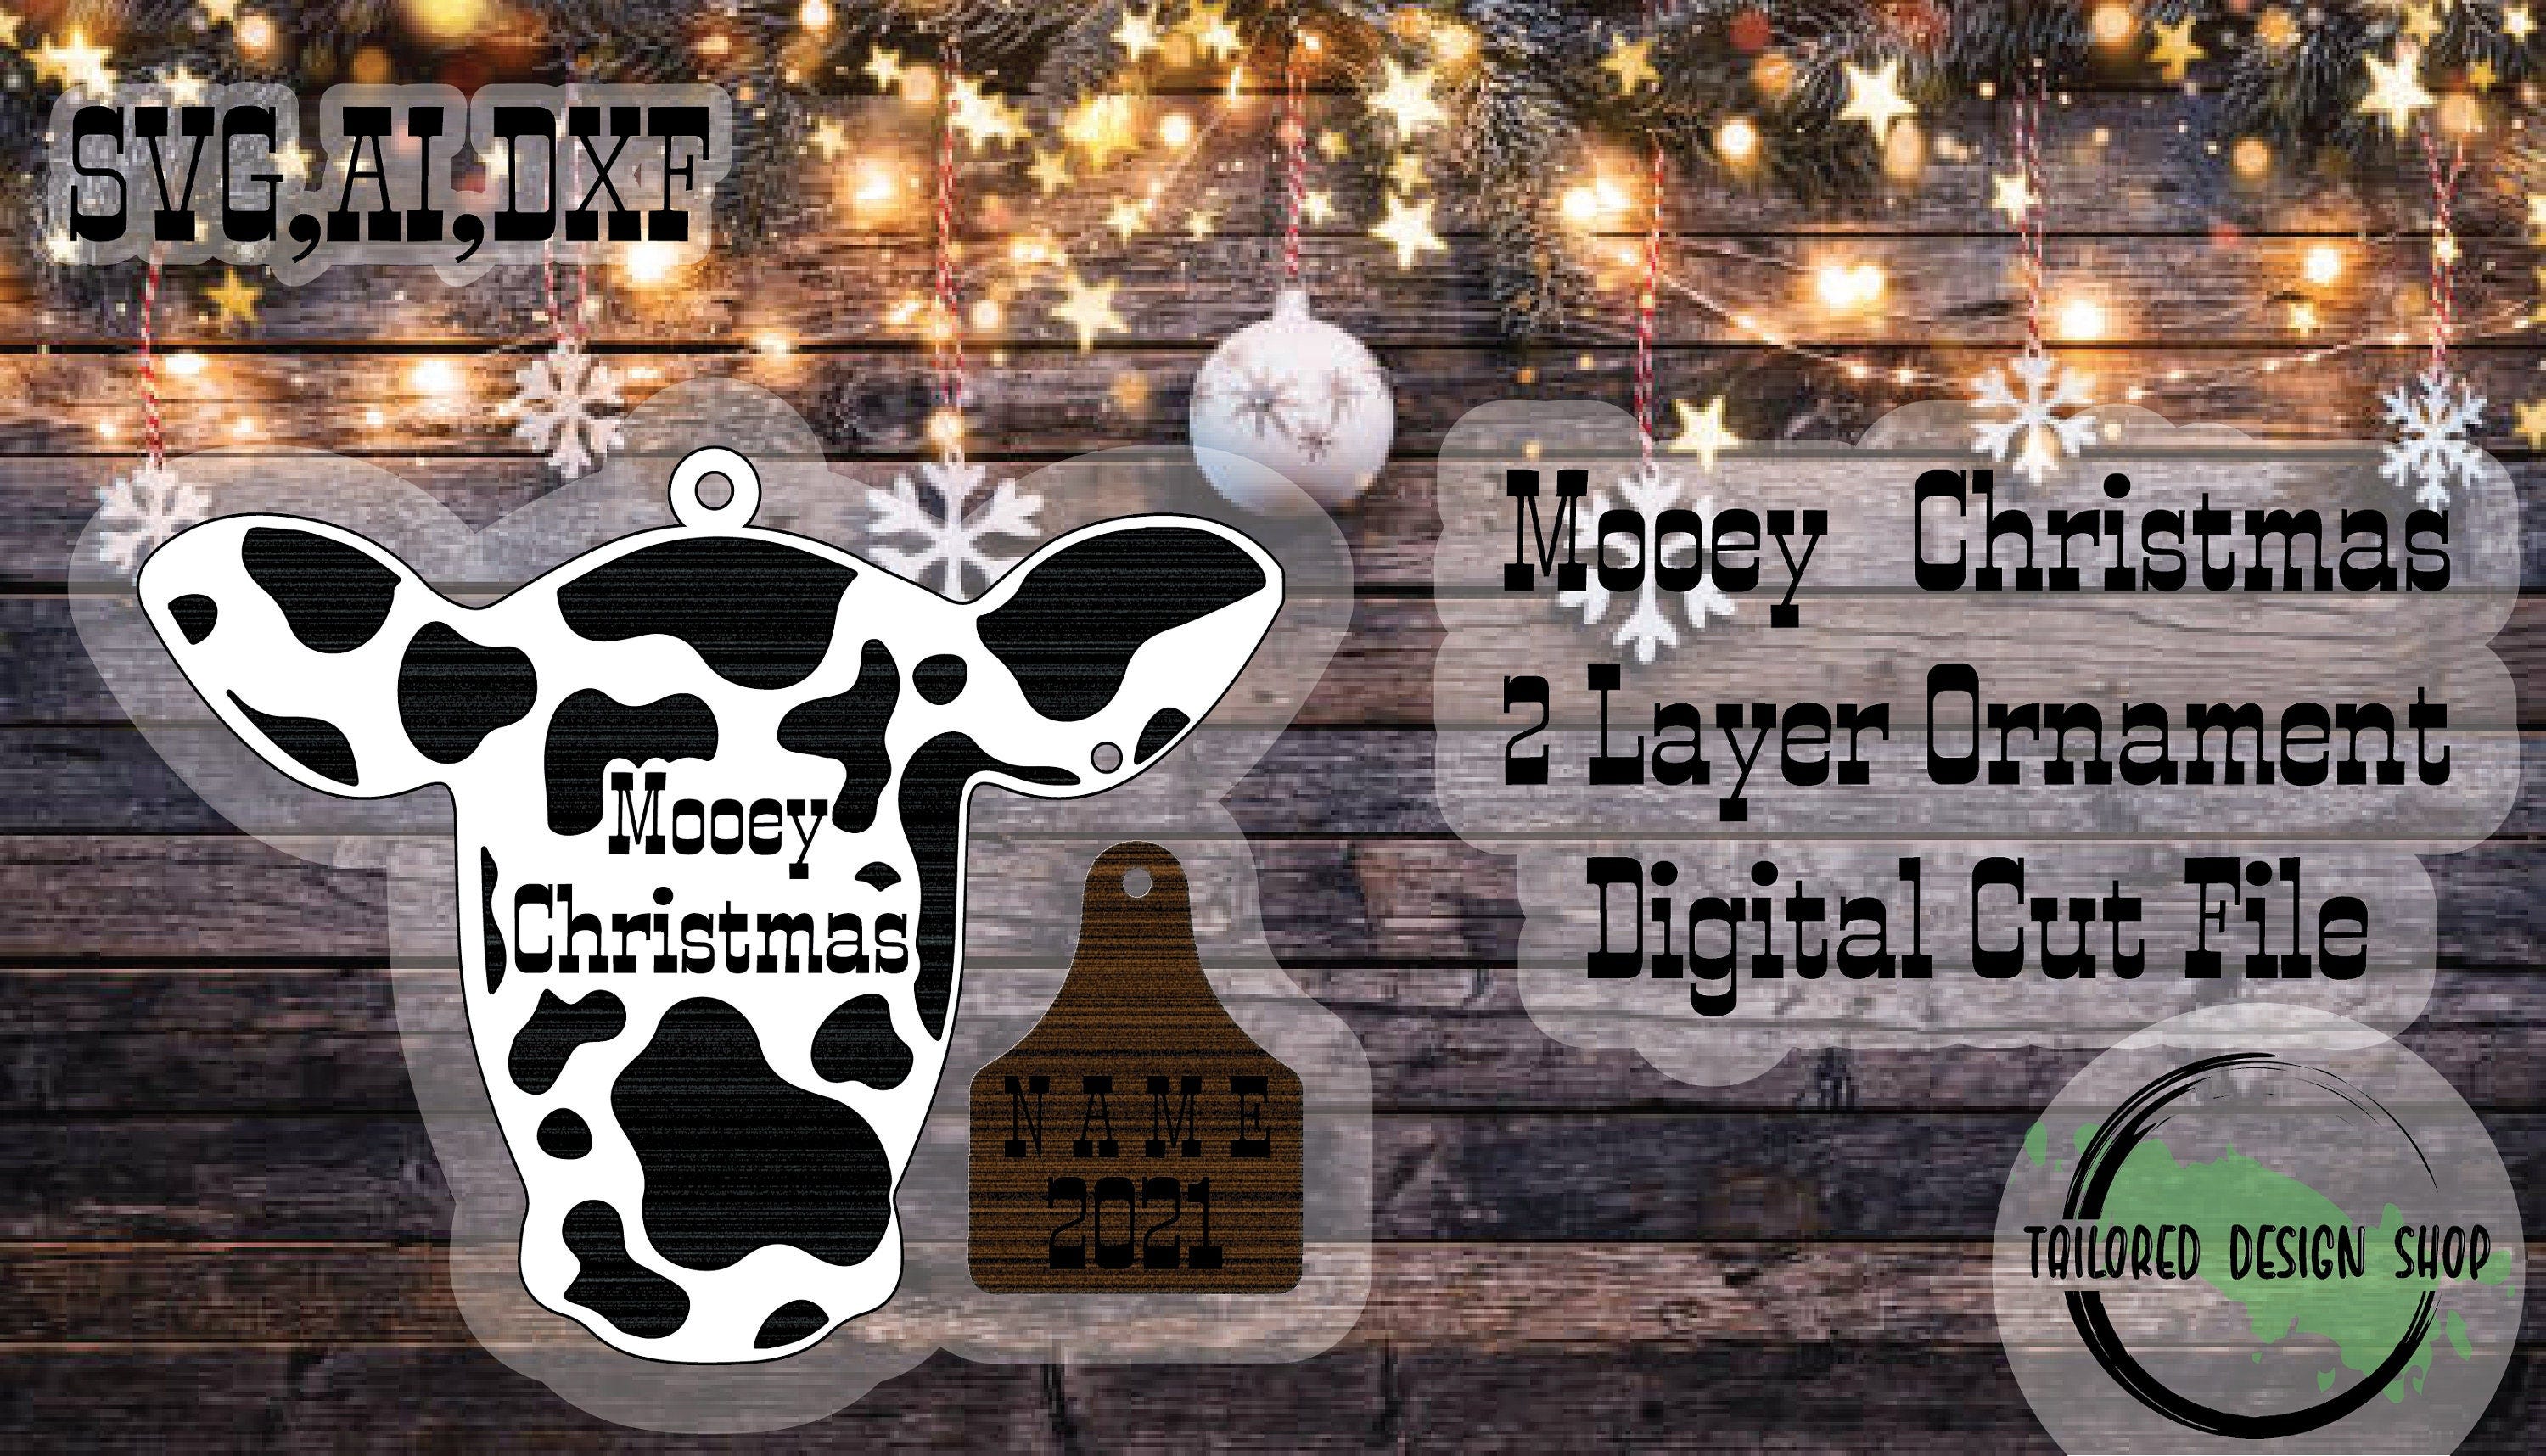 Mooey Christmas Cow and tag Ornament 2 Layer Digital Cut File/Glowforge/Laser Cutter/SVG/AI/DXF